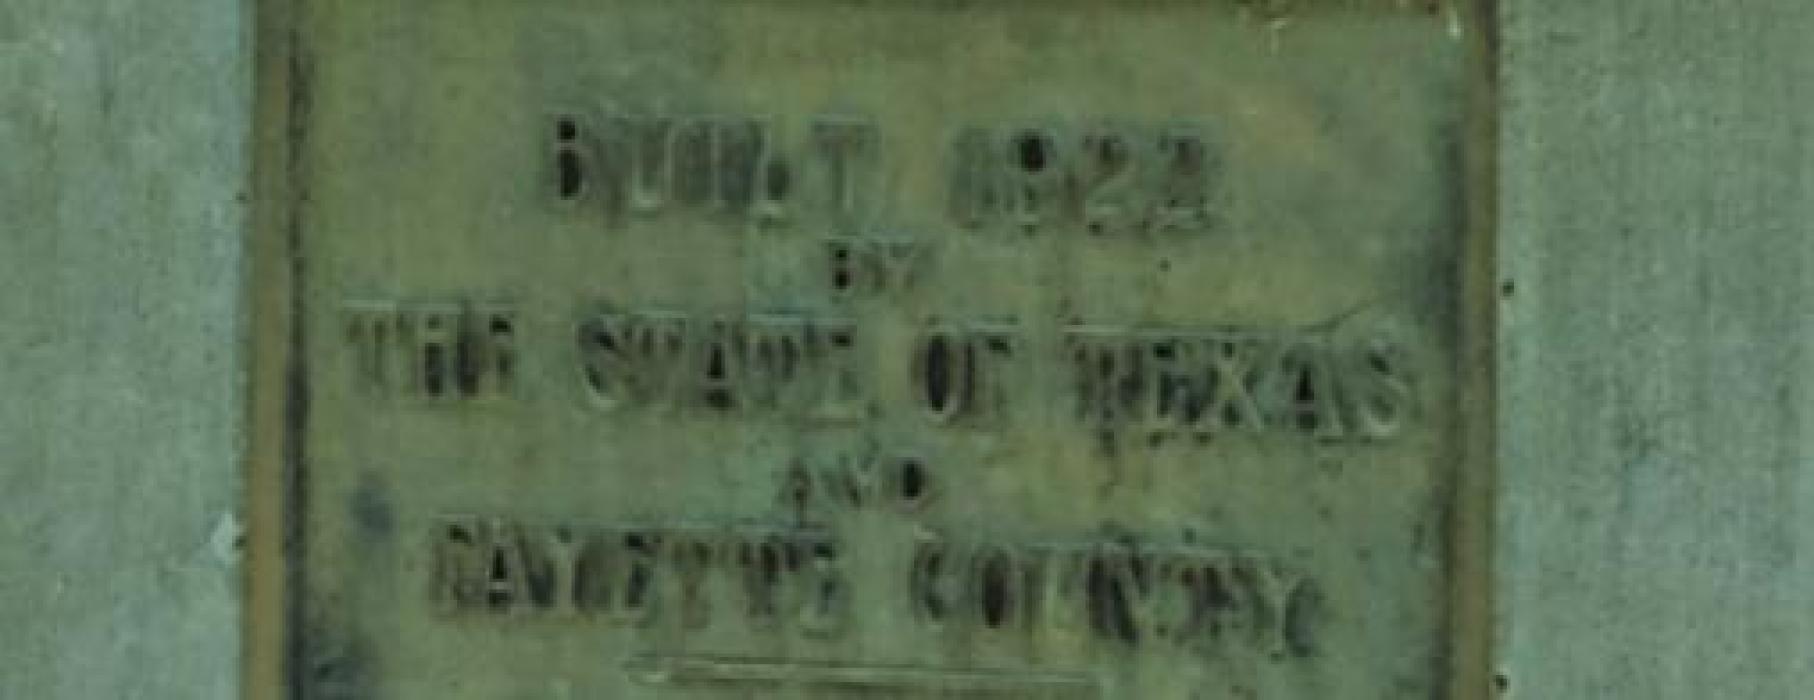 A plaque on the bridge crossing over the East Navidad River on FM 1579 still says “Built 1922 by The State of Texas and Fayette County.”